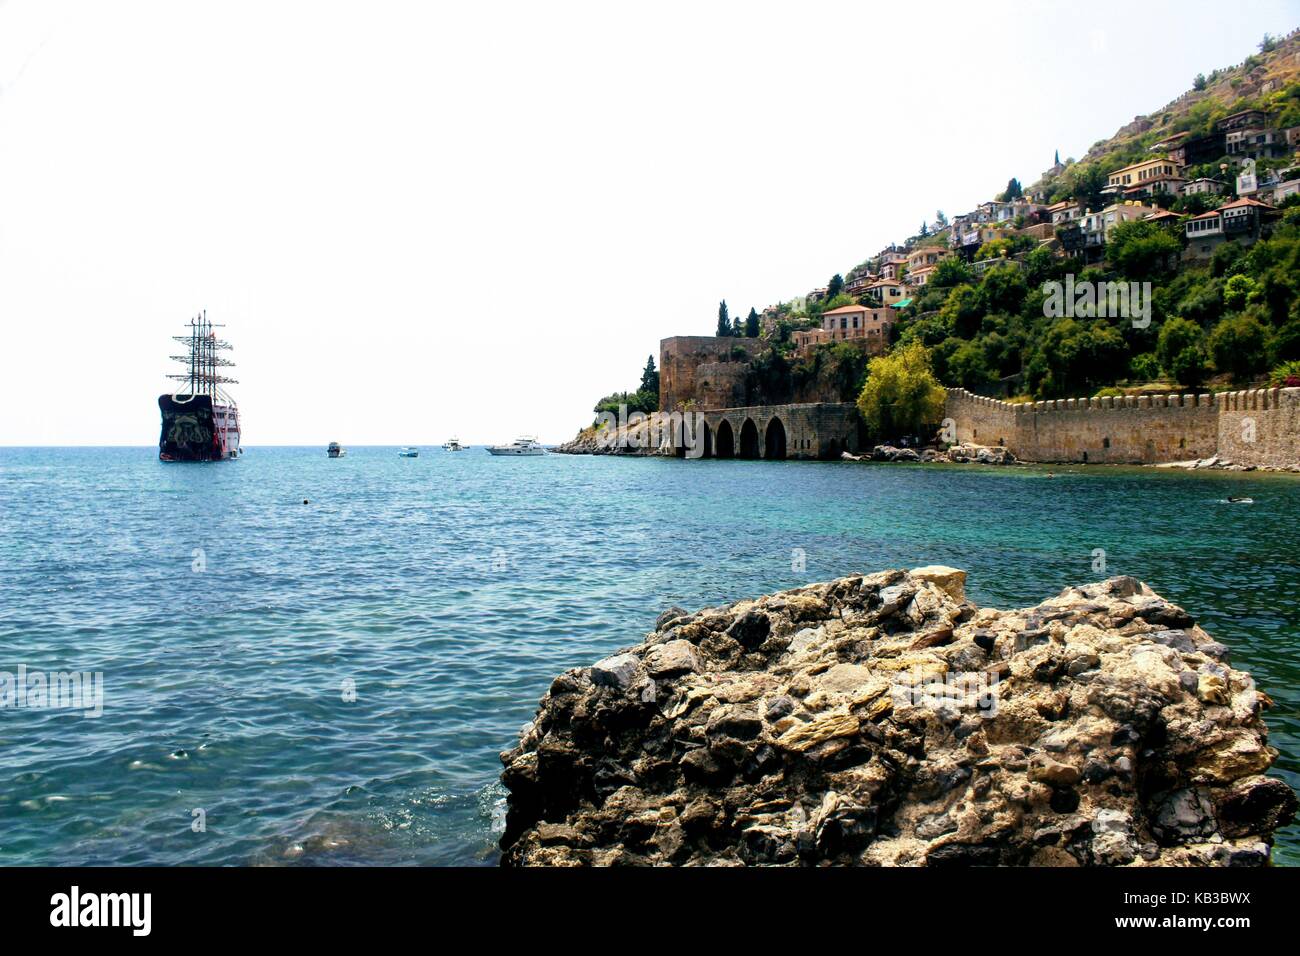 View of the old shipyard Kyzyl Kule from the beach near the Red Tower (Alanya, Turkey). Stock Photo